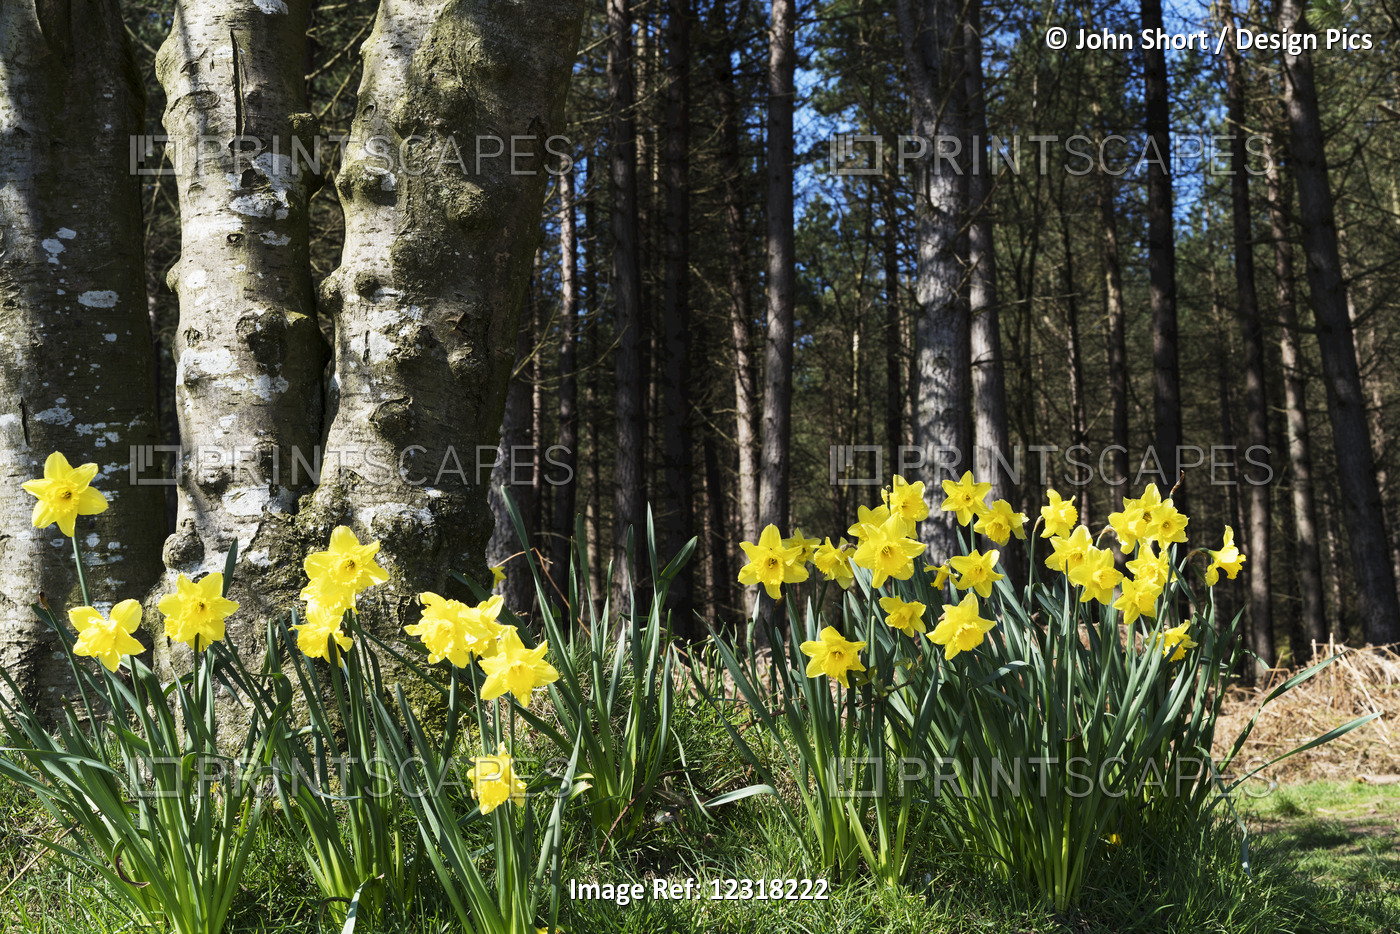 Blossoming Daffodils On The Edge Of A Forest; Northumberland, England